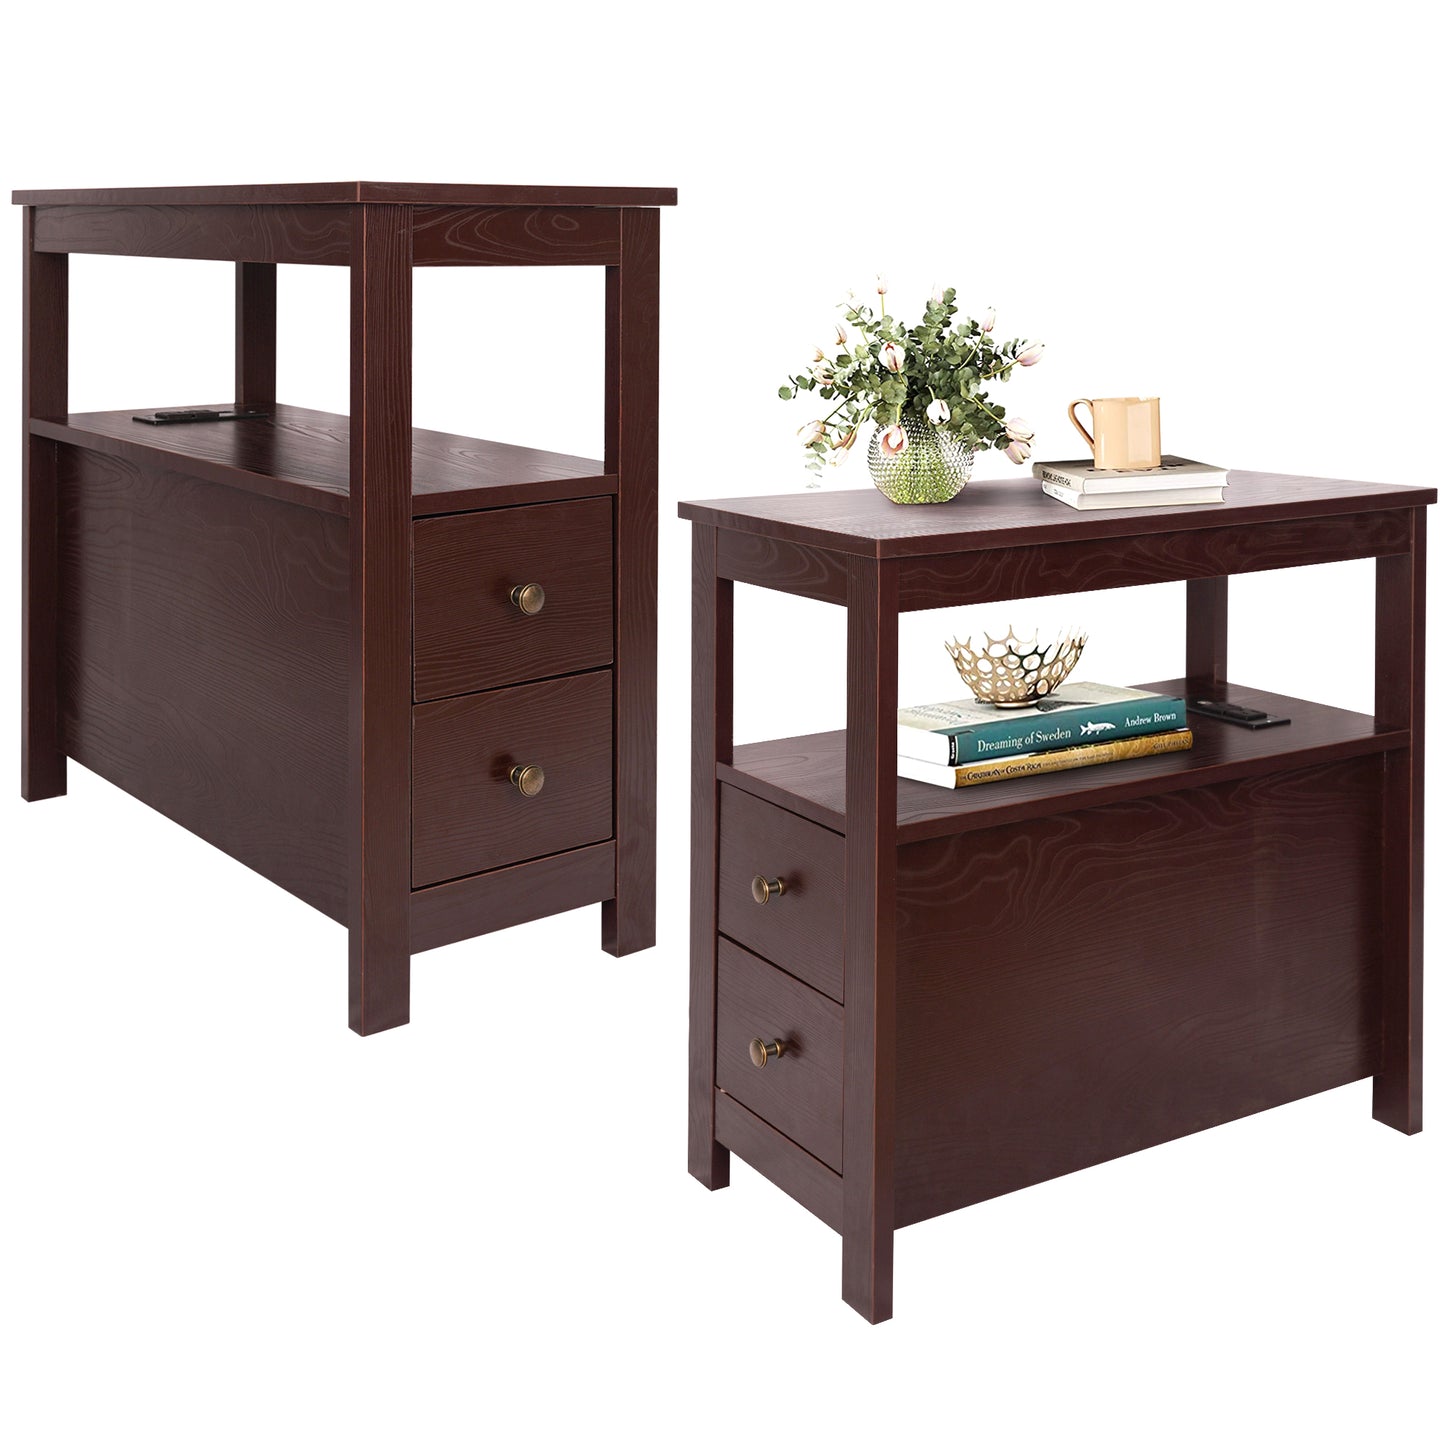 Side Table for Living Room, Nightstand Set of 2, Modern Side Cabinet with 2 Drawers, Open Shelf, Power Outlets and USB Ports, Wood End Table with Storage, Bedside Table for Bedroom, Espresso, D4683